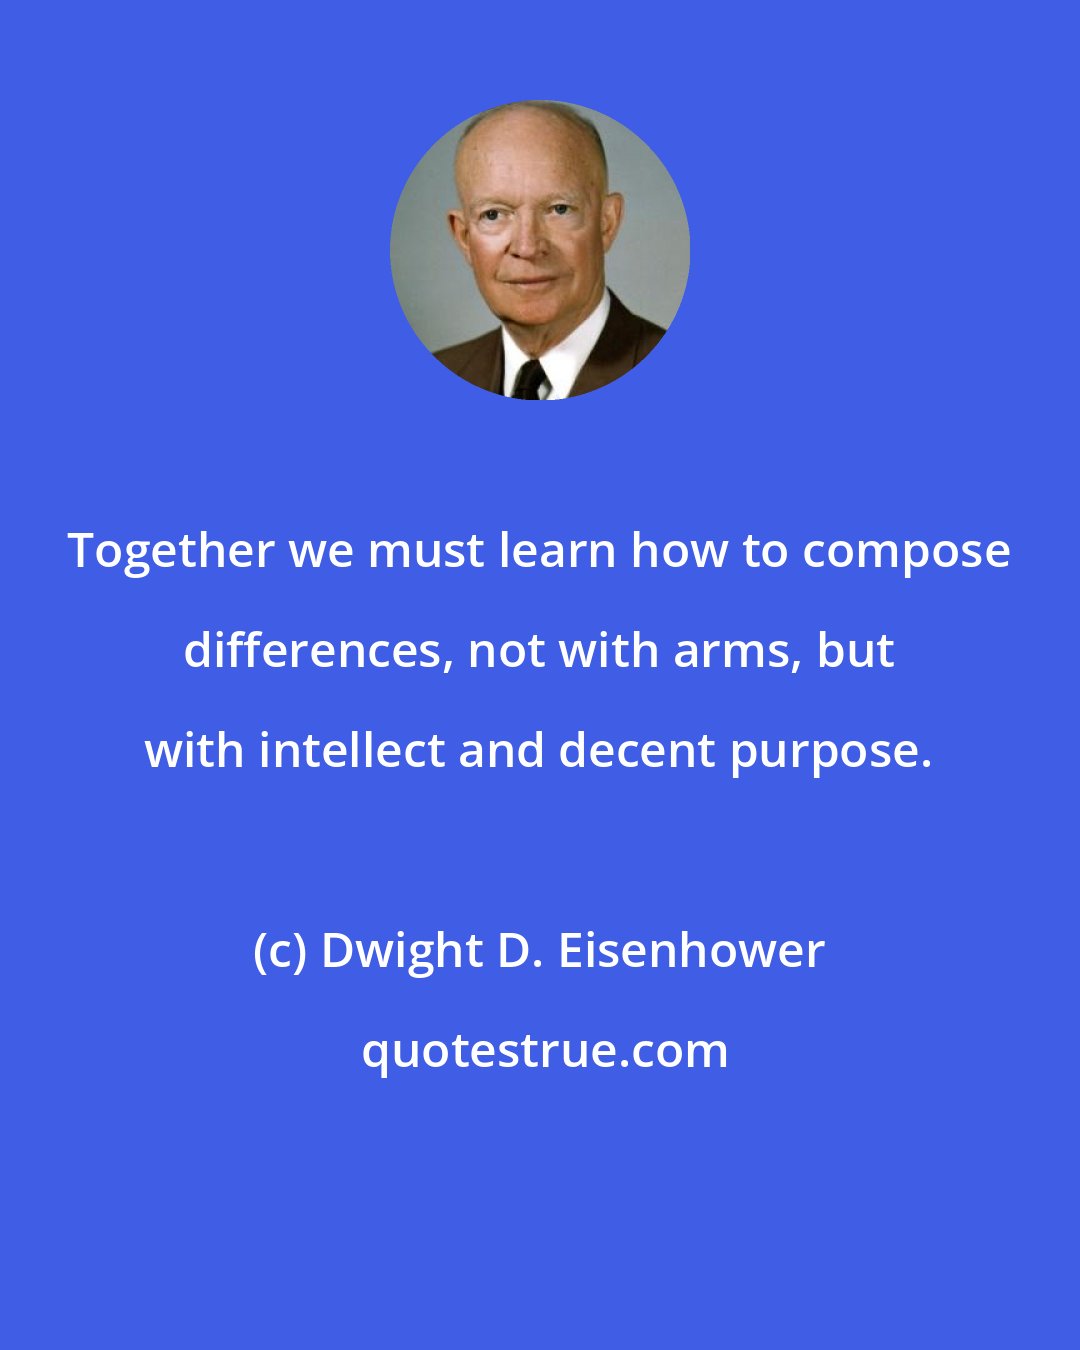 Dwight D. Eisenhower: Together we must learn how to compose differences, not with arms, but with intellect and decent purpose.